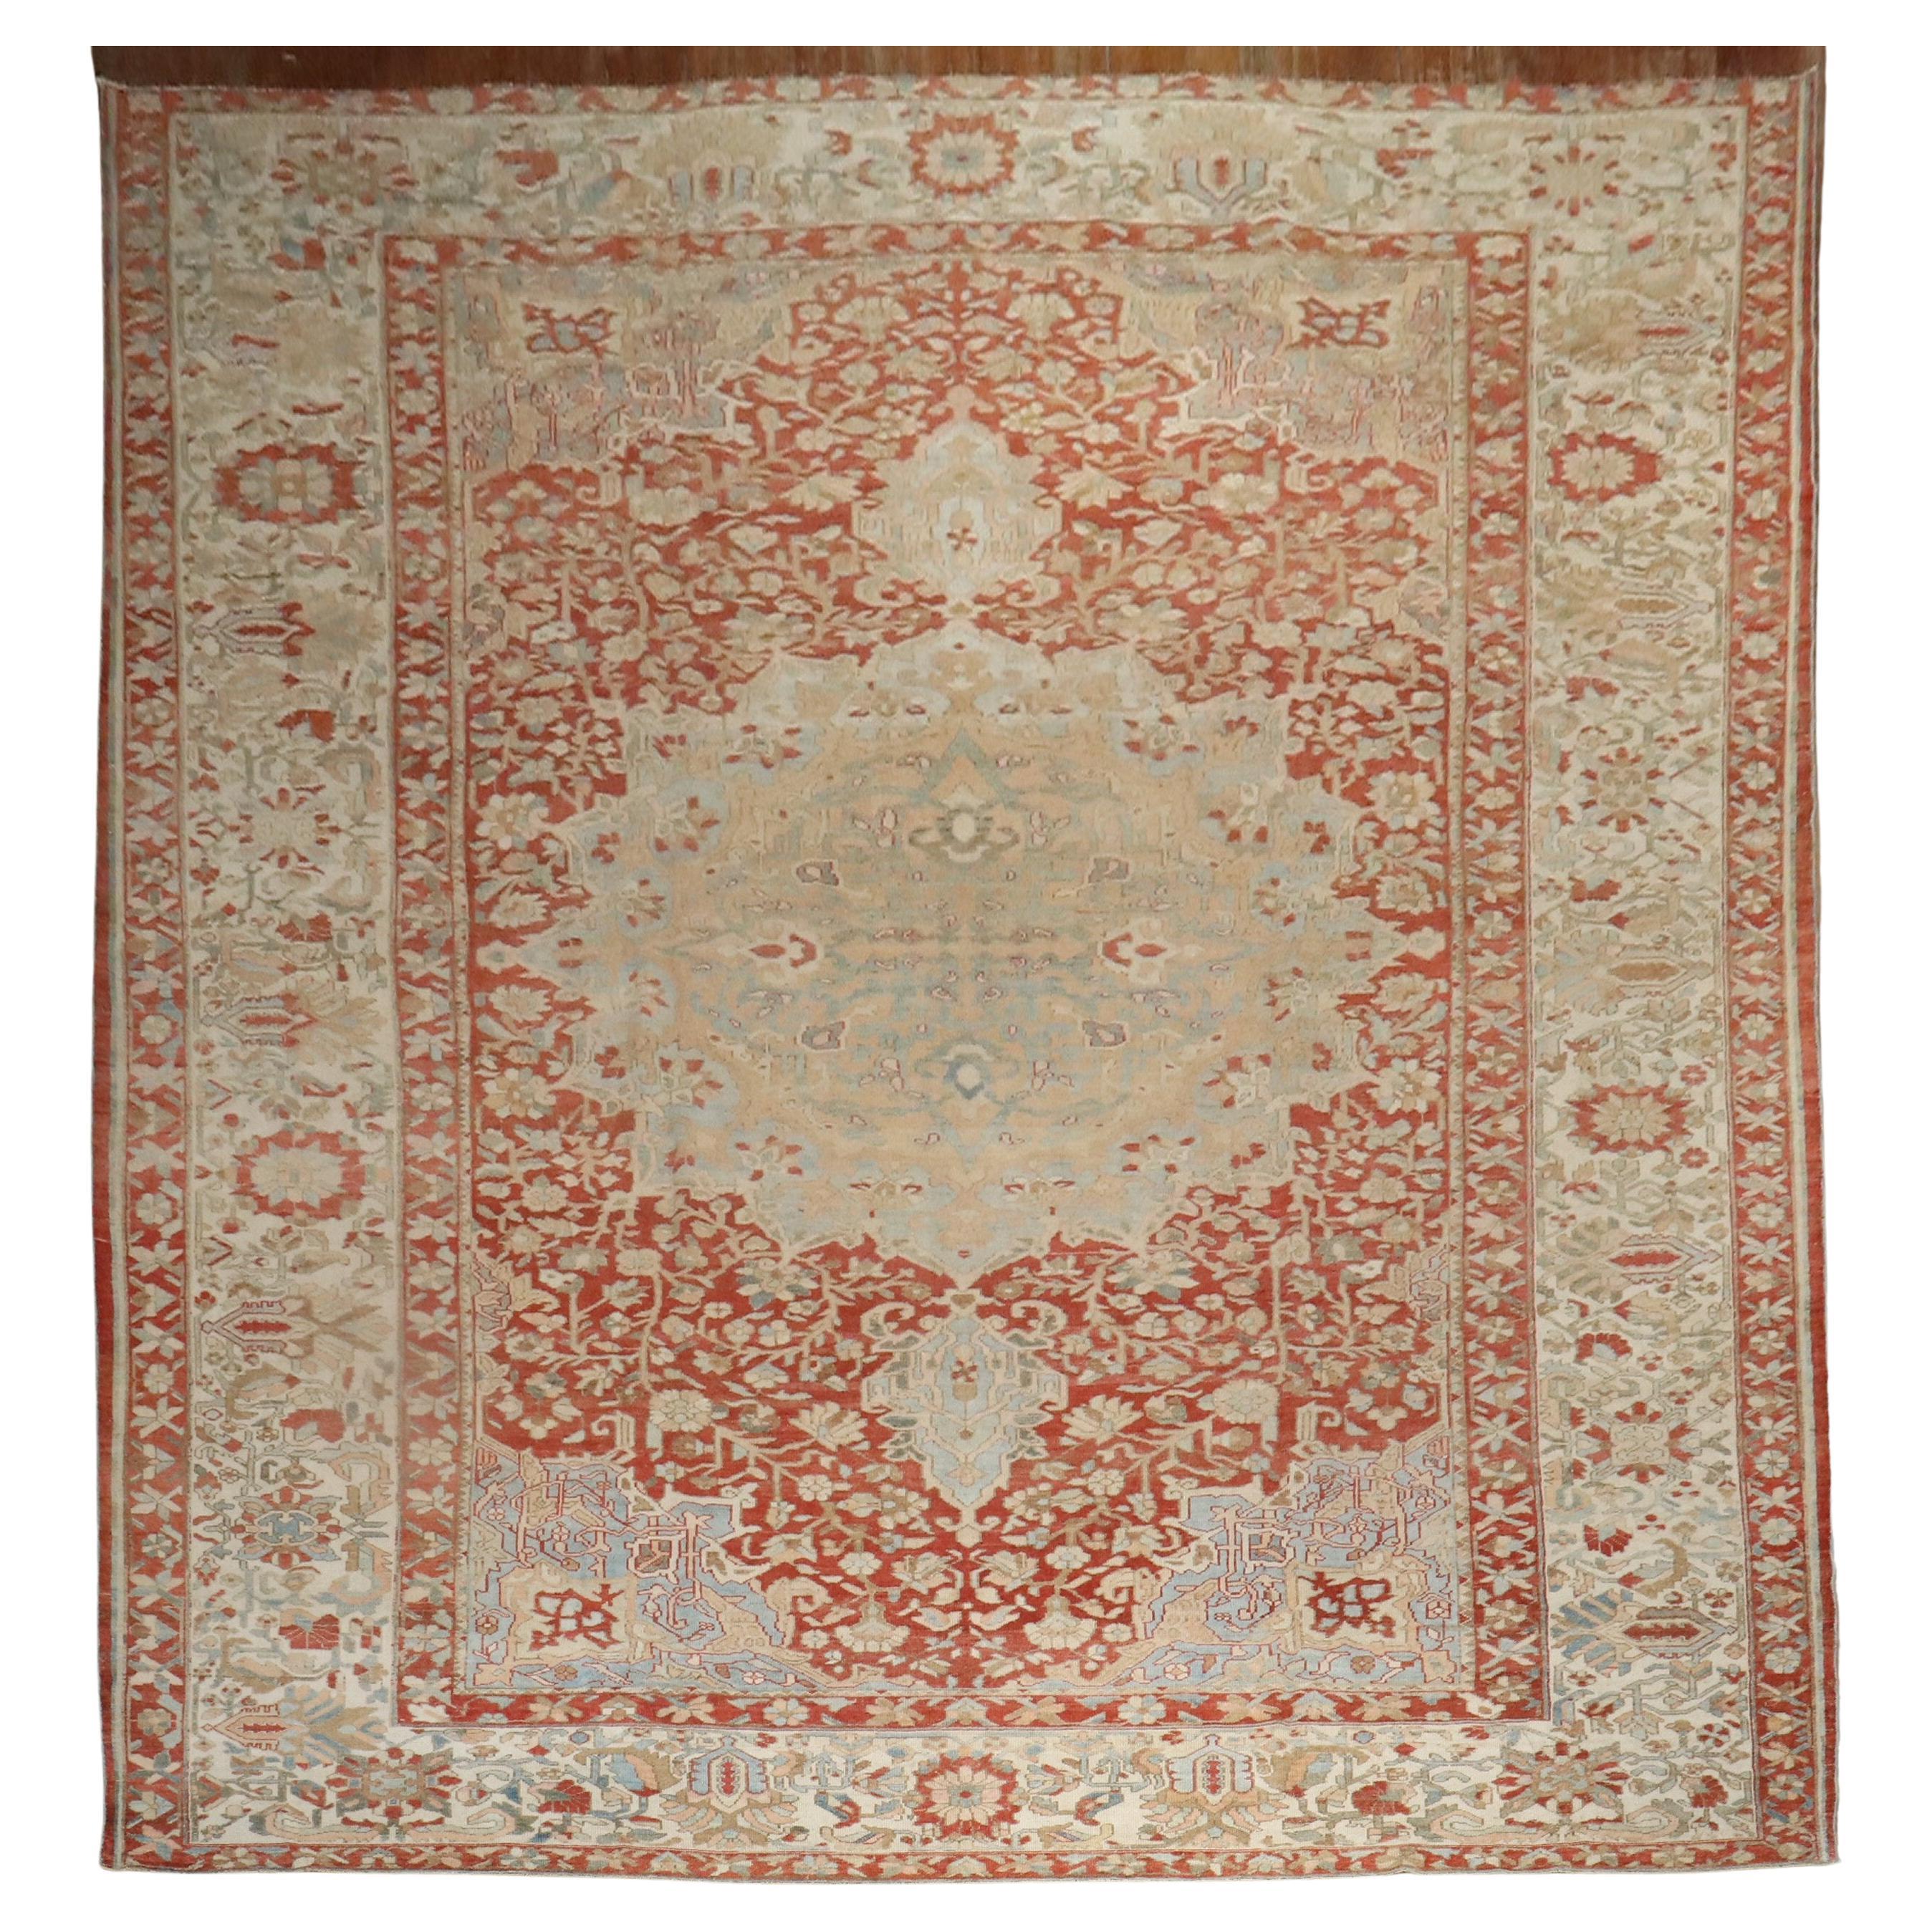 Oversize geometric Persian Bakhtiari rug in rustic tones. Brick red field with dominant accents in khaki, ivory, and sky blue

Measures: 12'5'' x 18'3'' circa 1930.